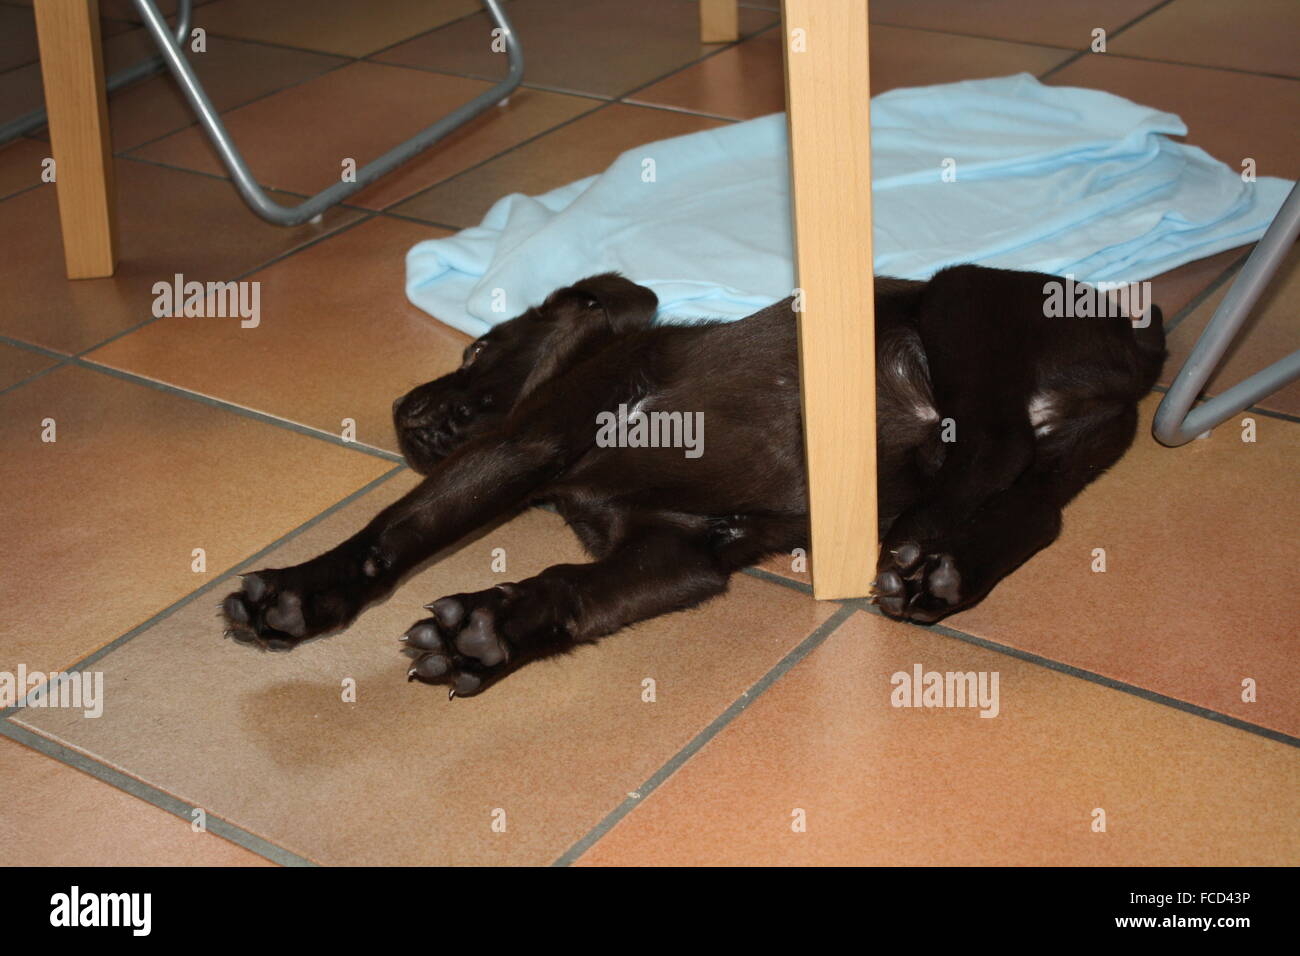 Puppy Lying On The Floor Under The Table Stock Photo